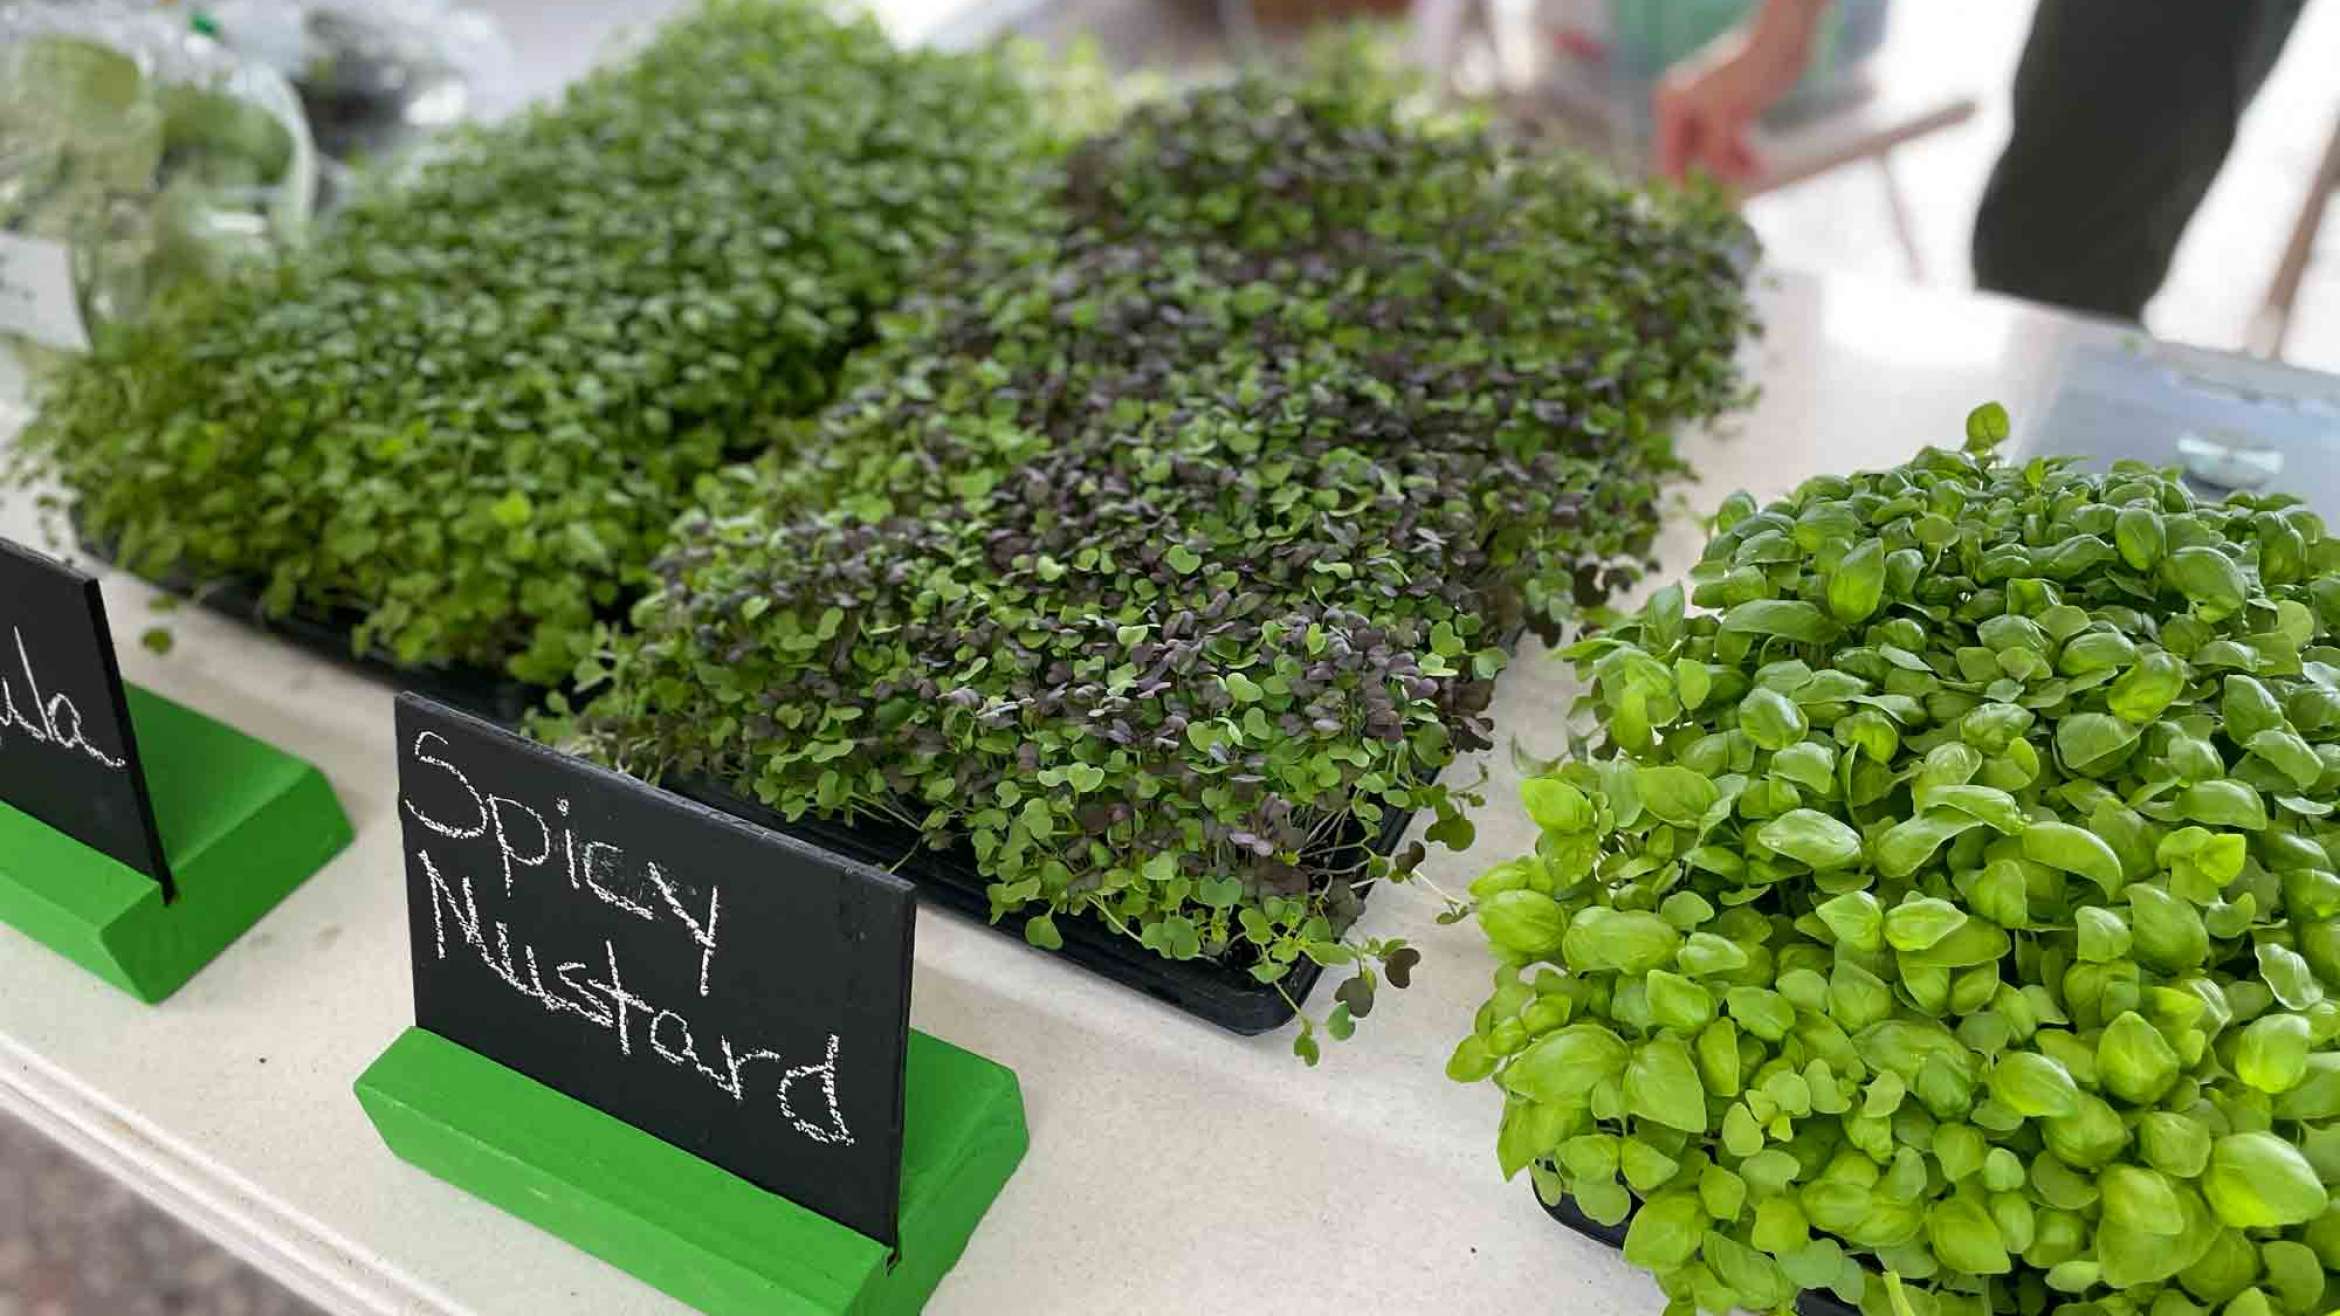 A table with trays of microgreens on it. The Spicy Mustard flavor is up front